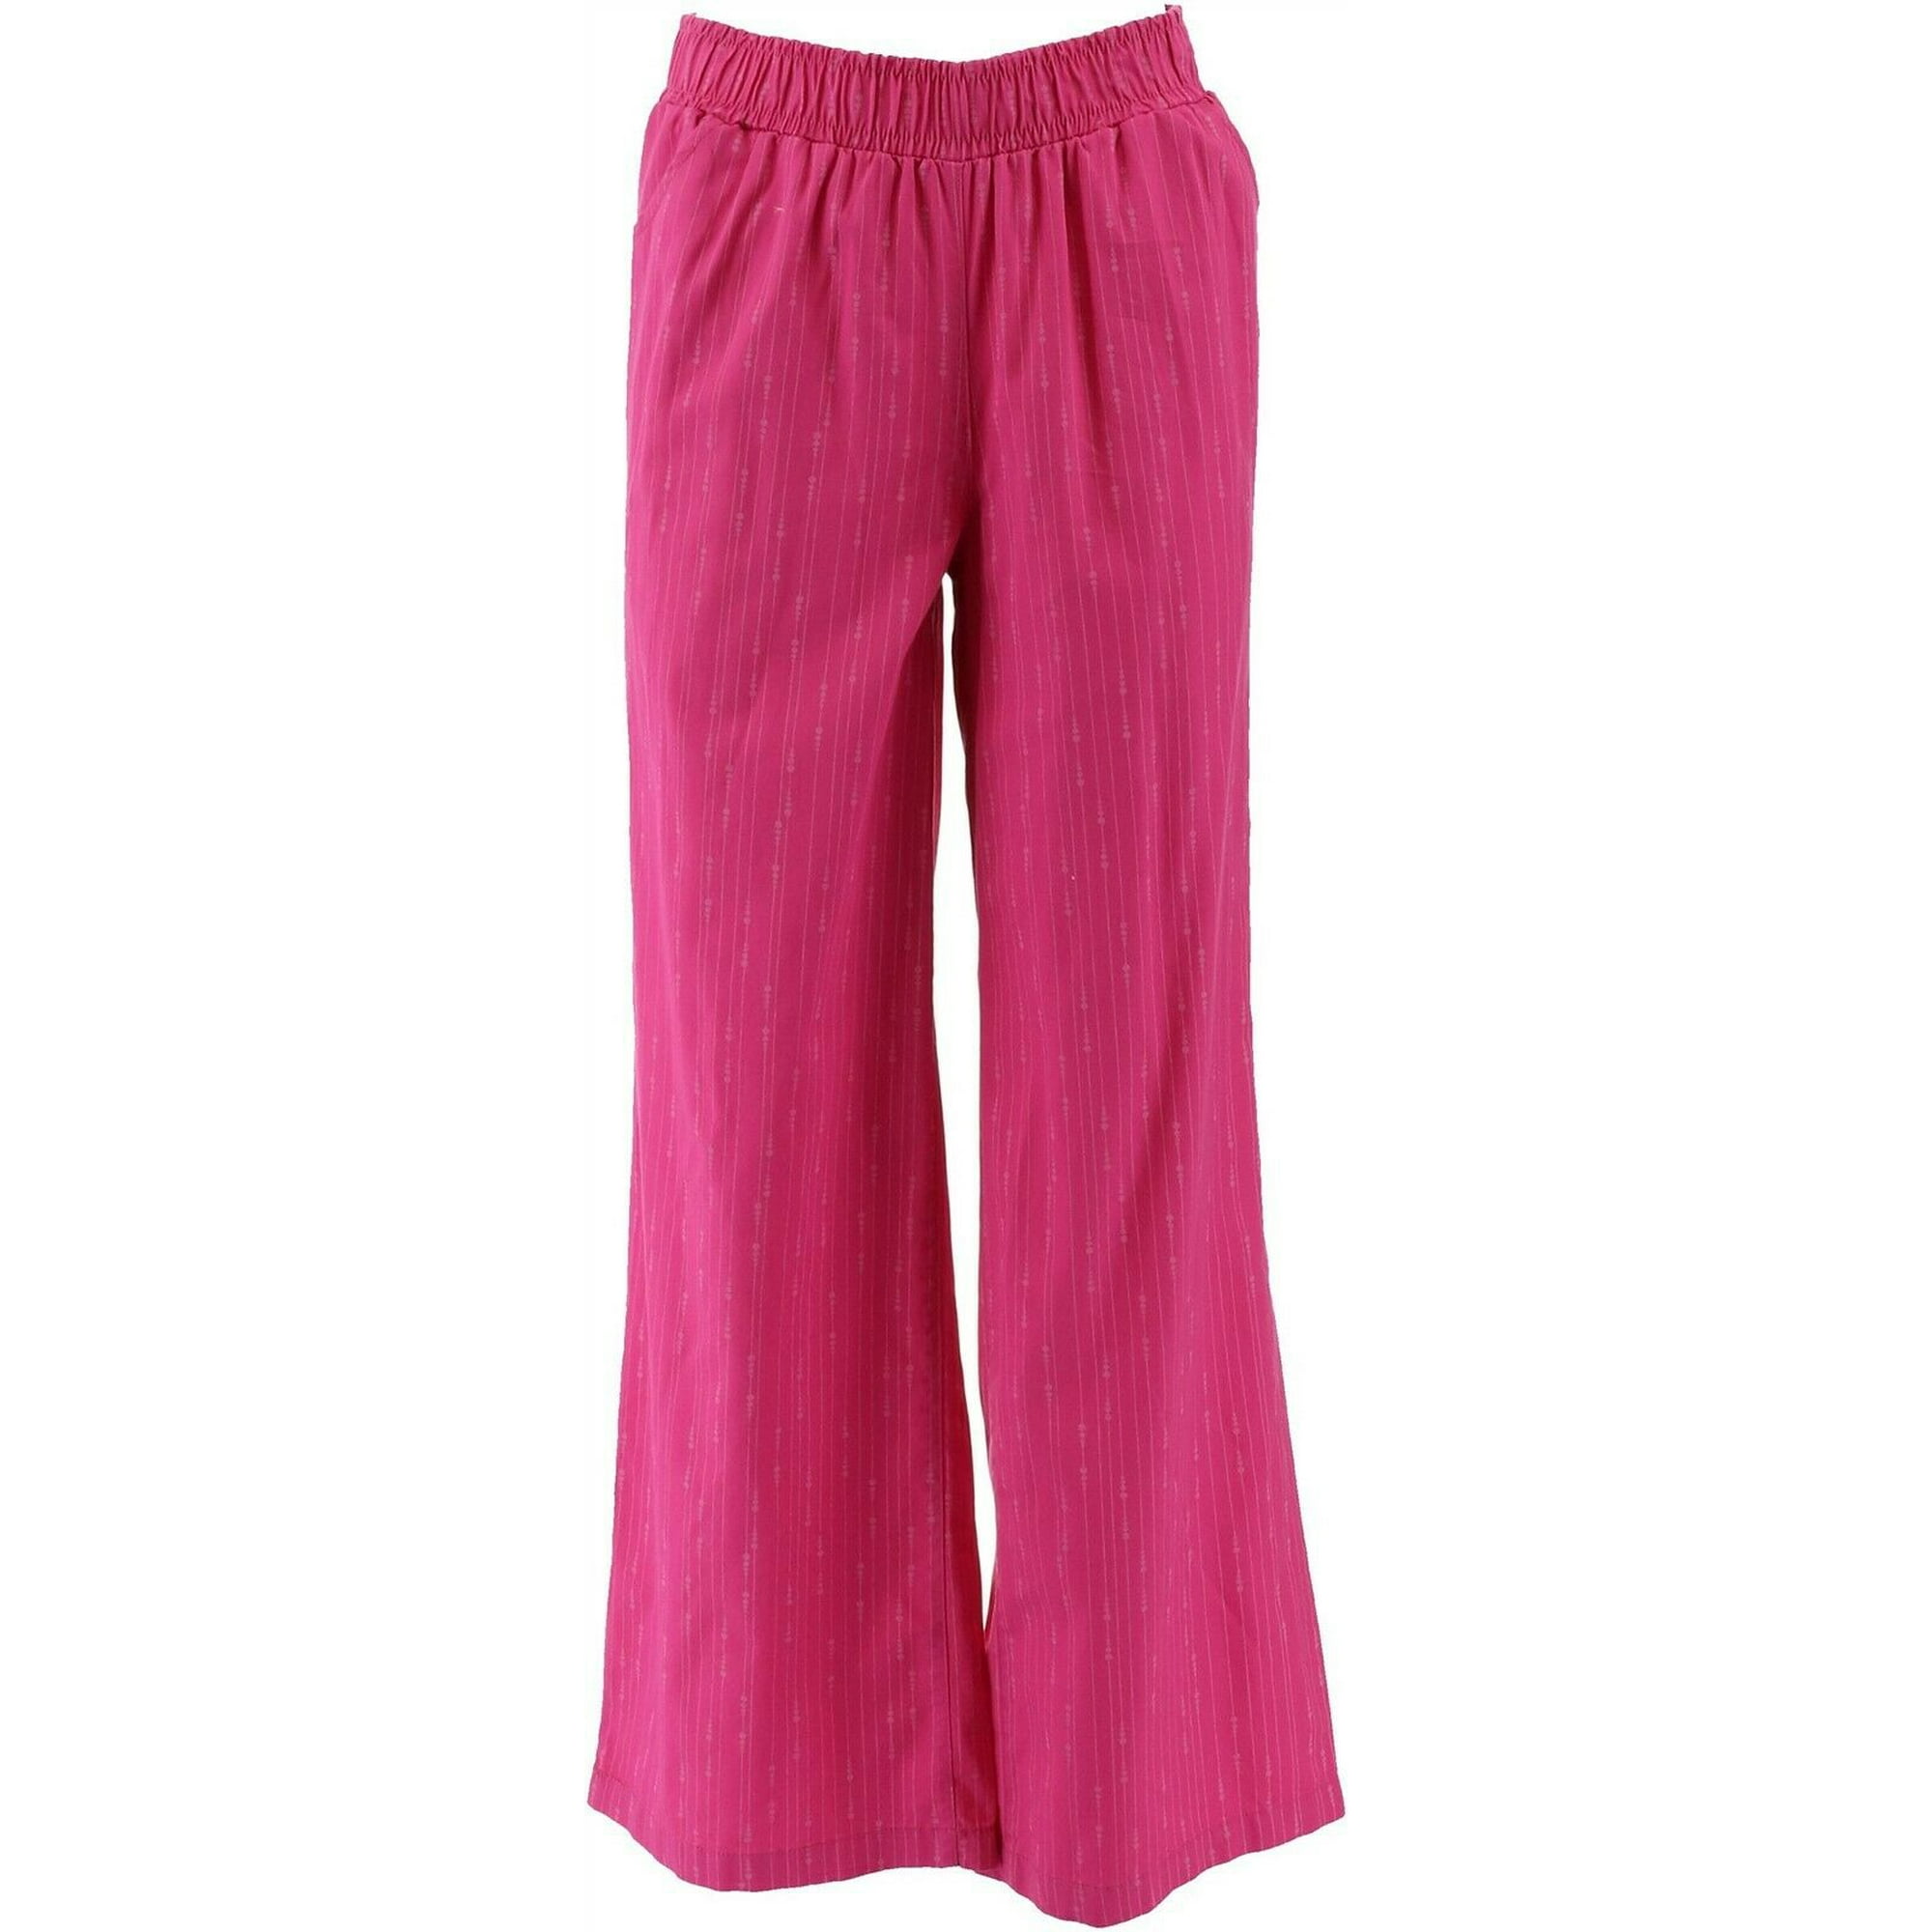 DG2 Diane Gilman SoftCell Wide-Leg Pant Magenta Sphere Strp PXS NEW 697-542